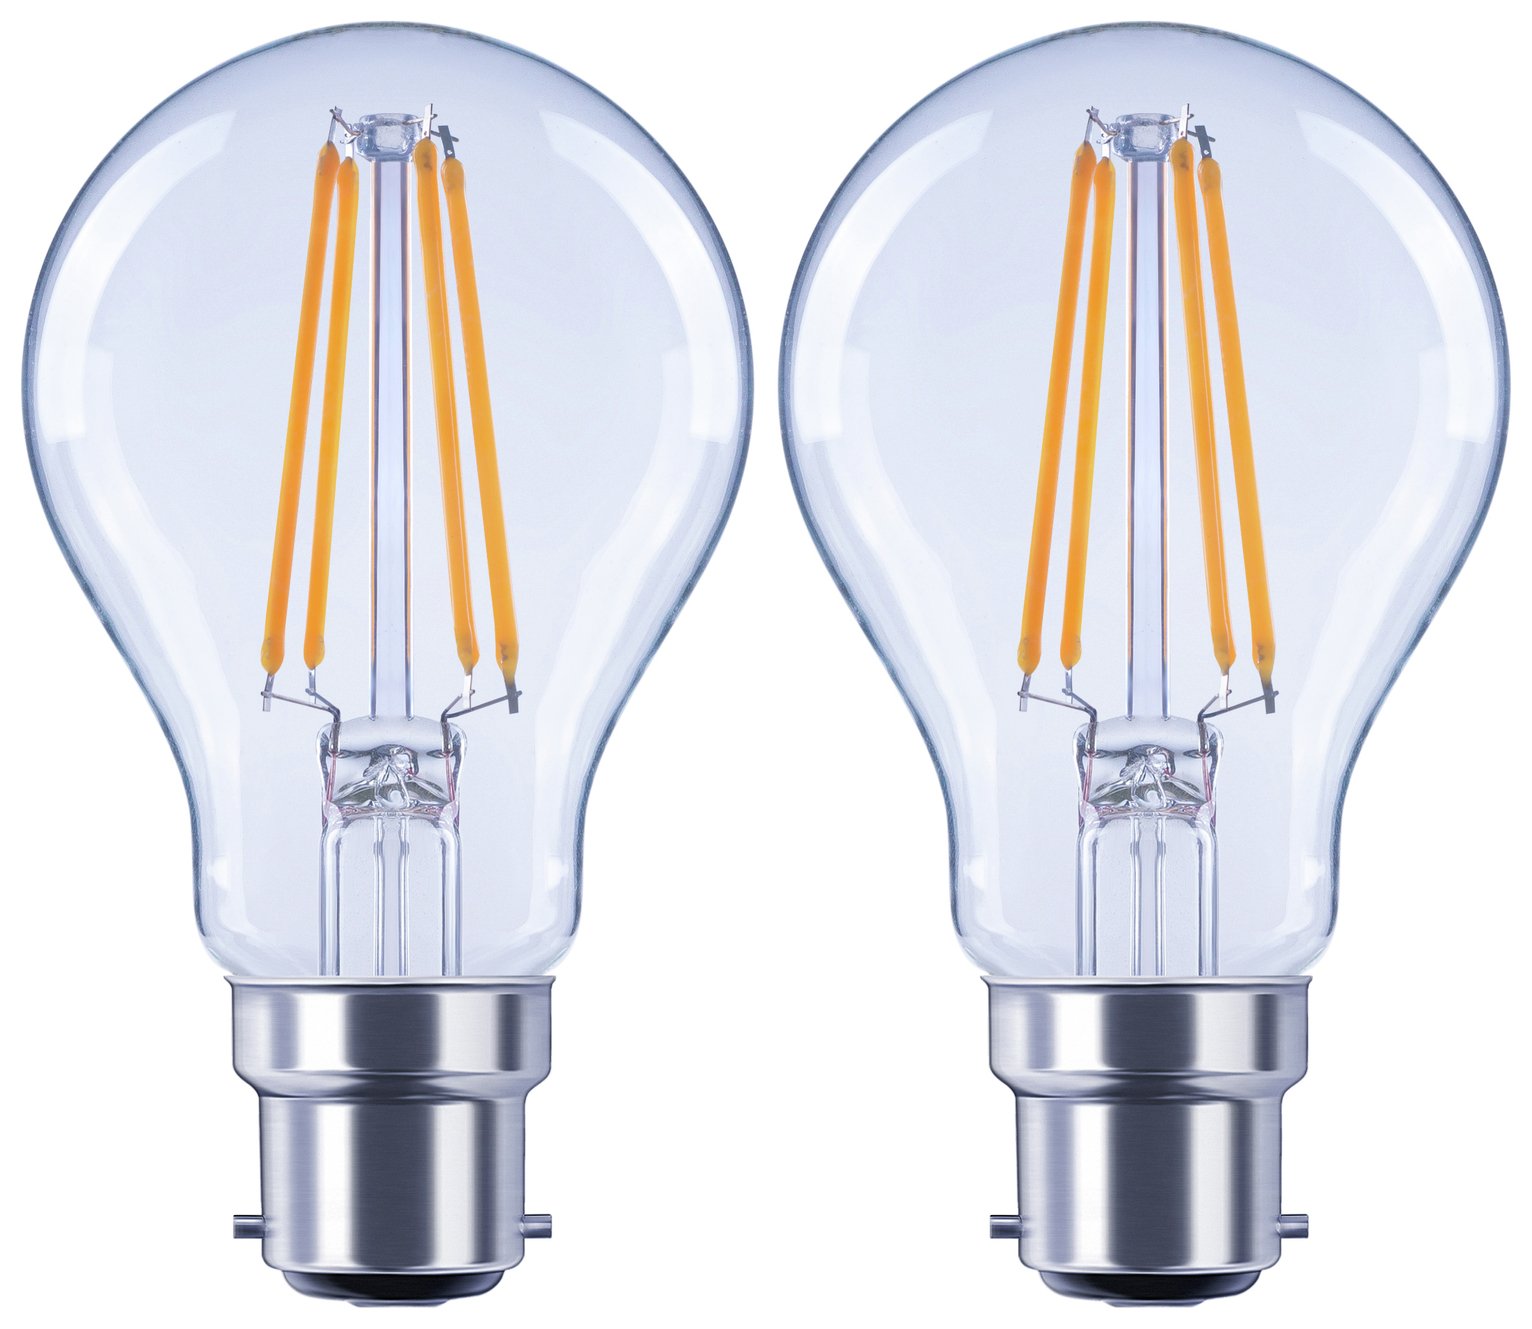 Argos Home 7W LED BC Dimmable Light Bulb - 2 Pack